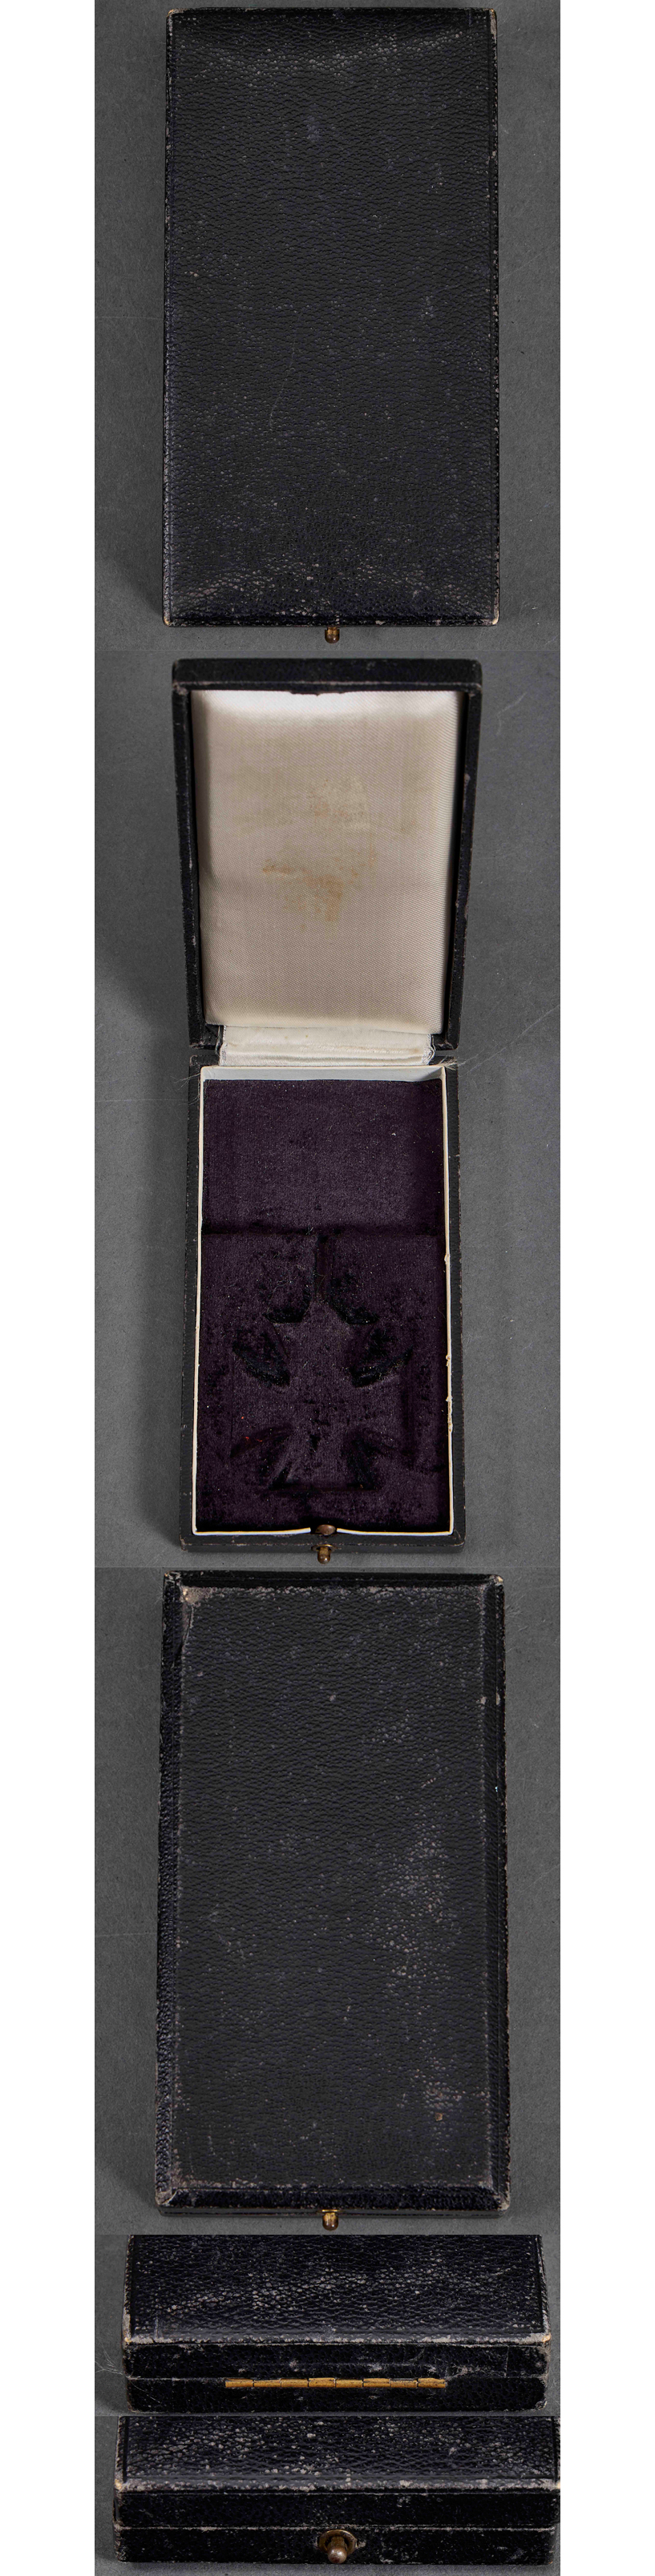 Issue Case for a Knights Cross